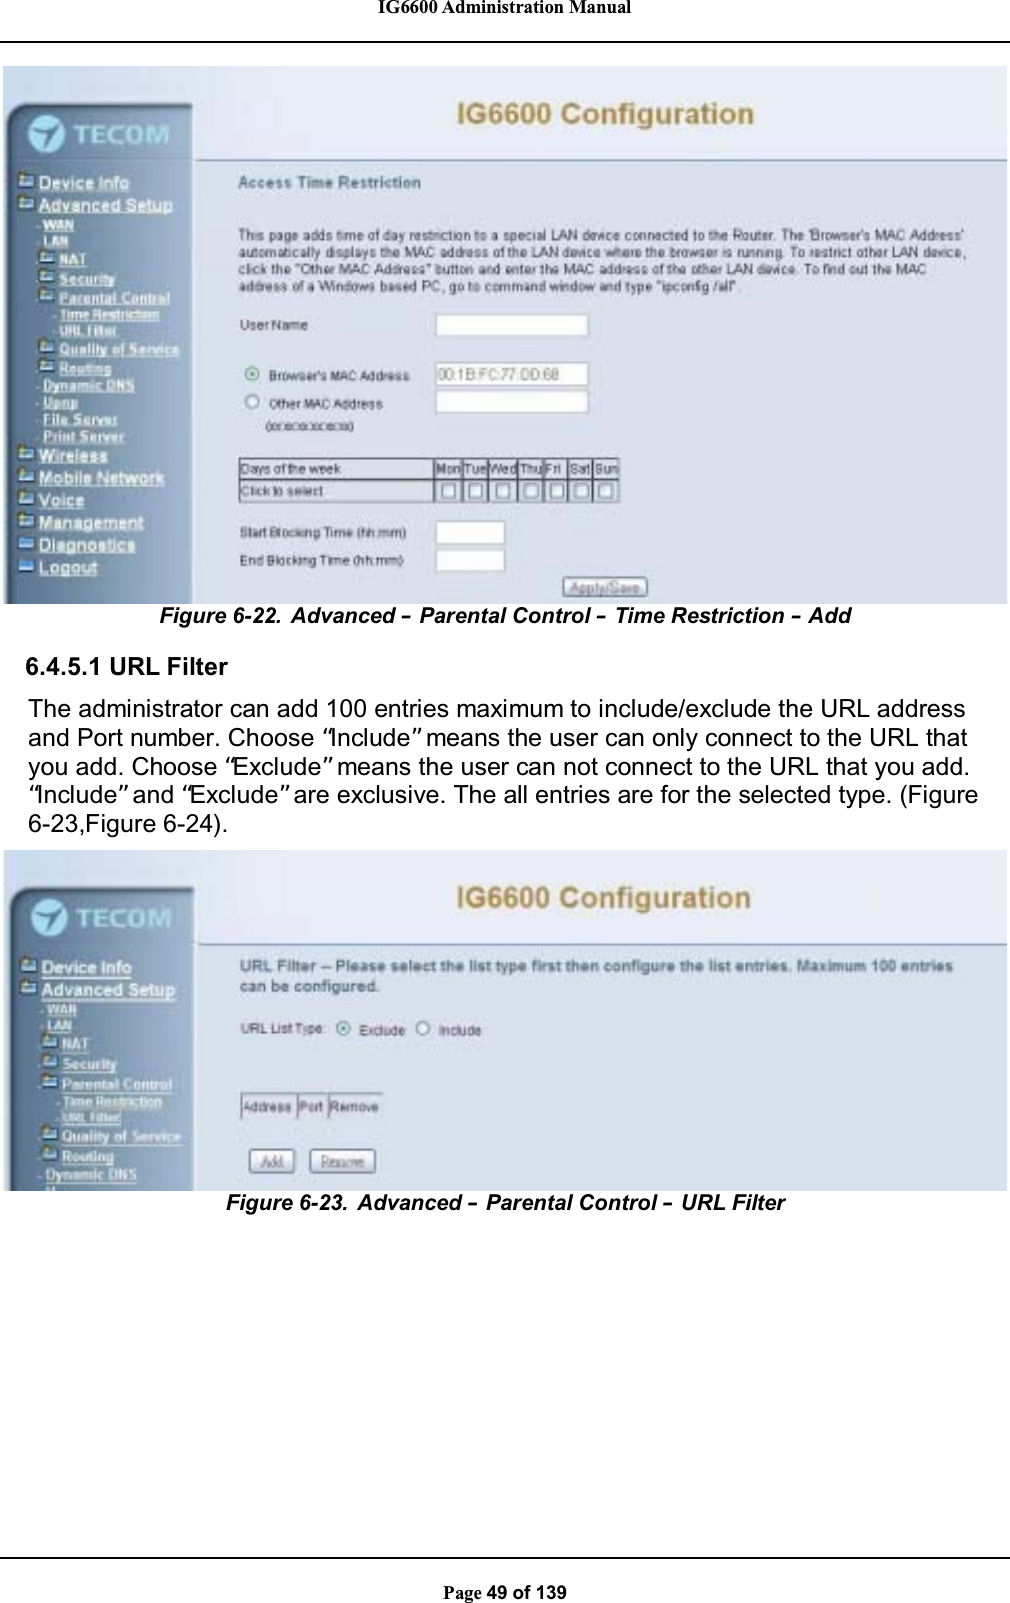 IG6600 Administration ManualPage 49 of 139Figure 6-22. Advanced –Parental Control –Time Restriction –Add6.4.5.1 URL FilterThe administrator can add 100 entries maximum to include/exclude the URL addressand Port number. Choose “Include”means the user can only connect to the URL thatyou add. Choose “Exclude”means the user can not connect to the URL that you add.“Include”and “Exclude”are exclusive. The all entries are for the selected type. (Figure6-23,Figure 6-24).Figure 6-23. Advanced –Parental Control –URL Filter